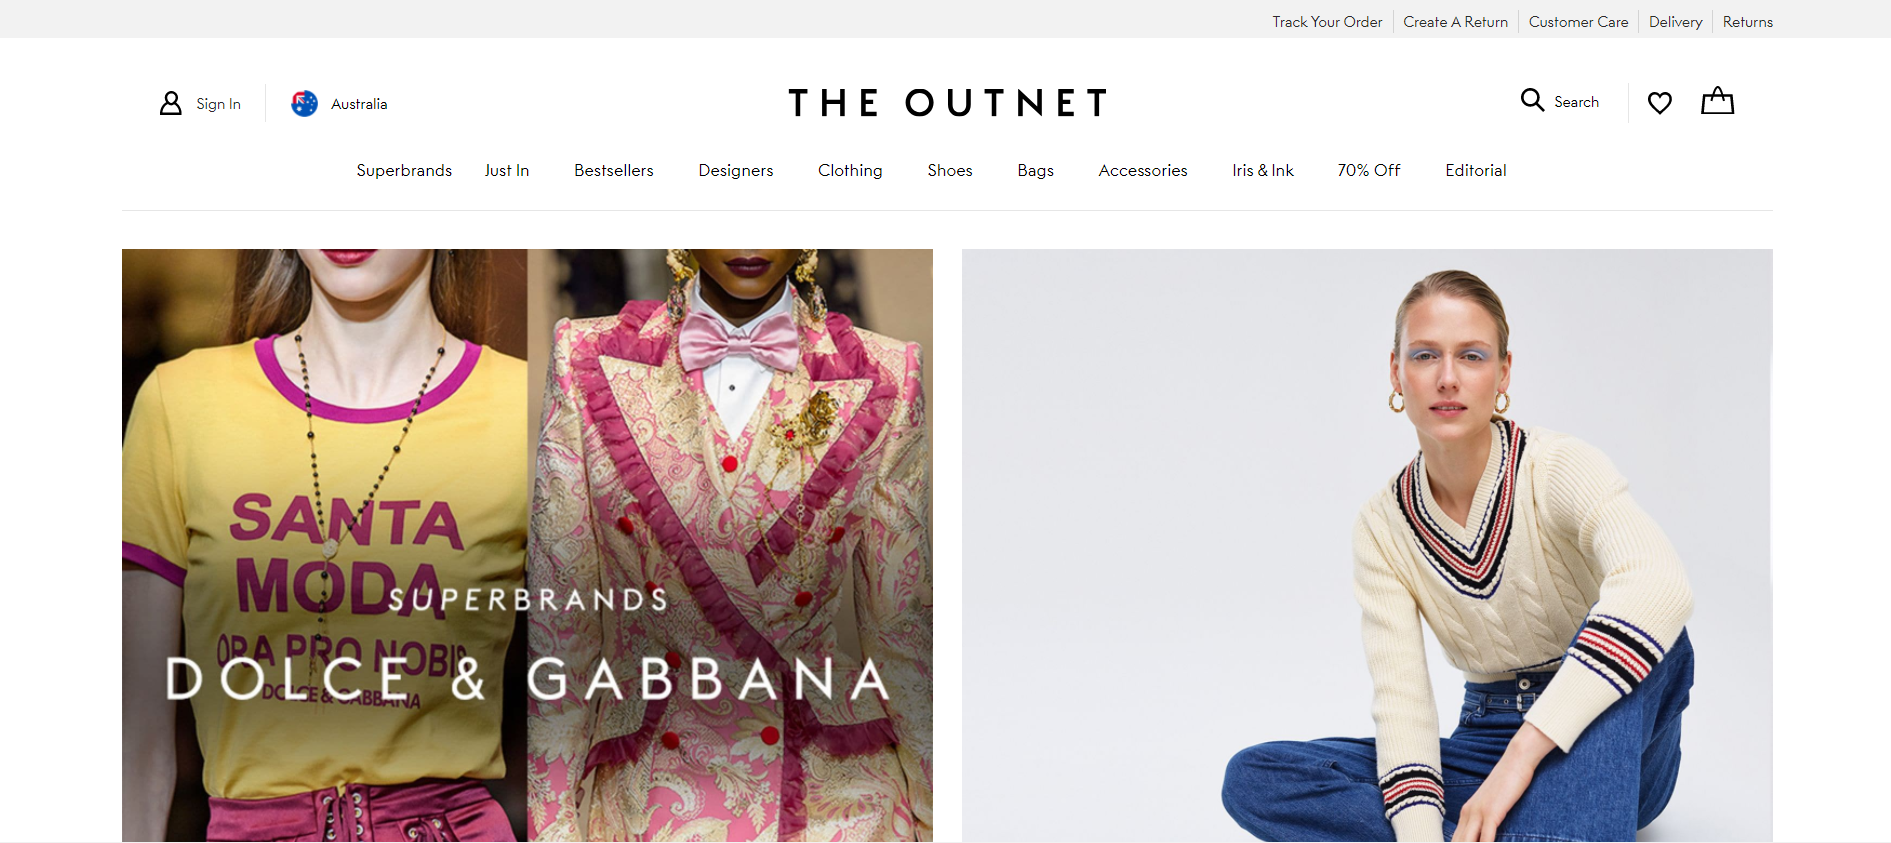 The Outnet website homepage